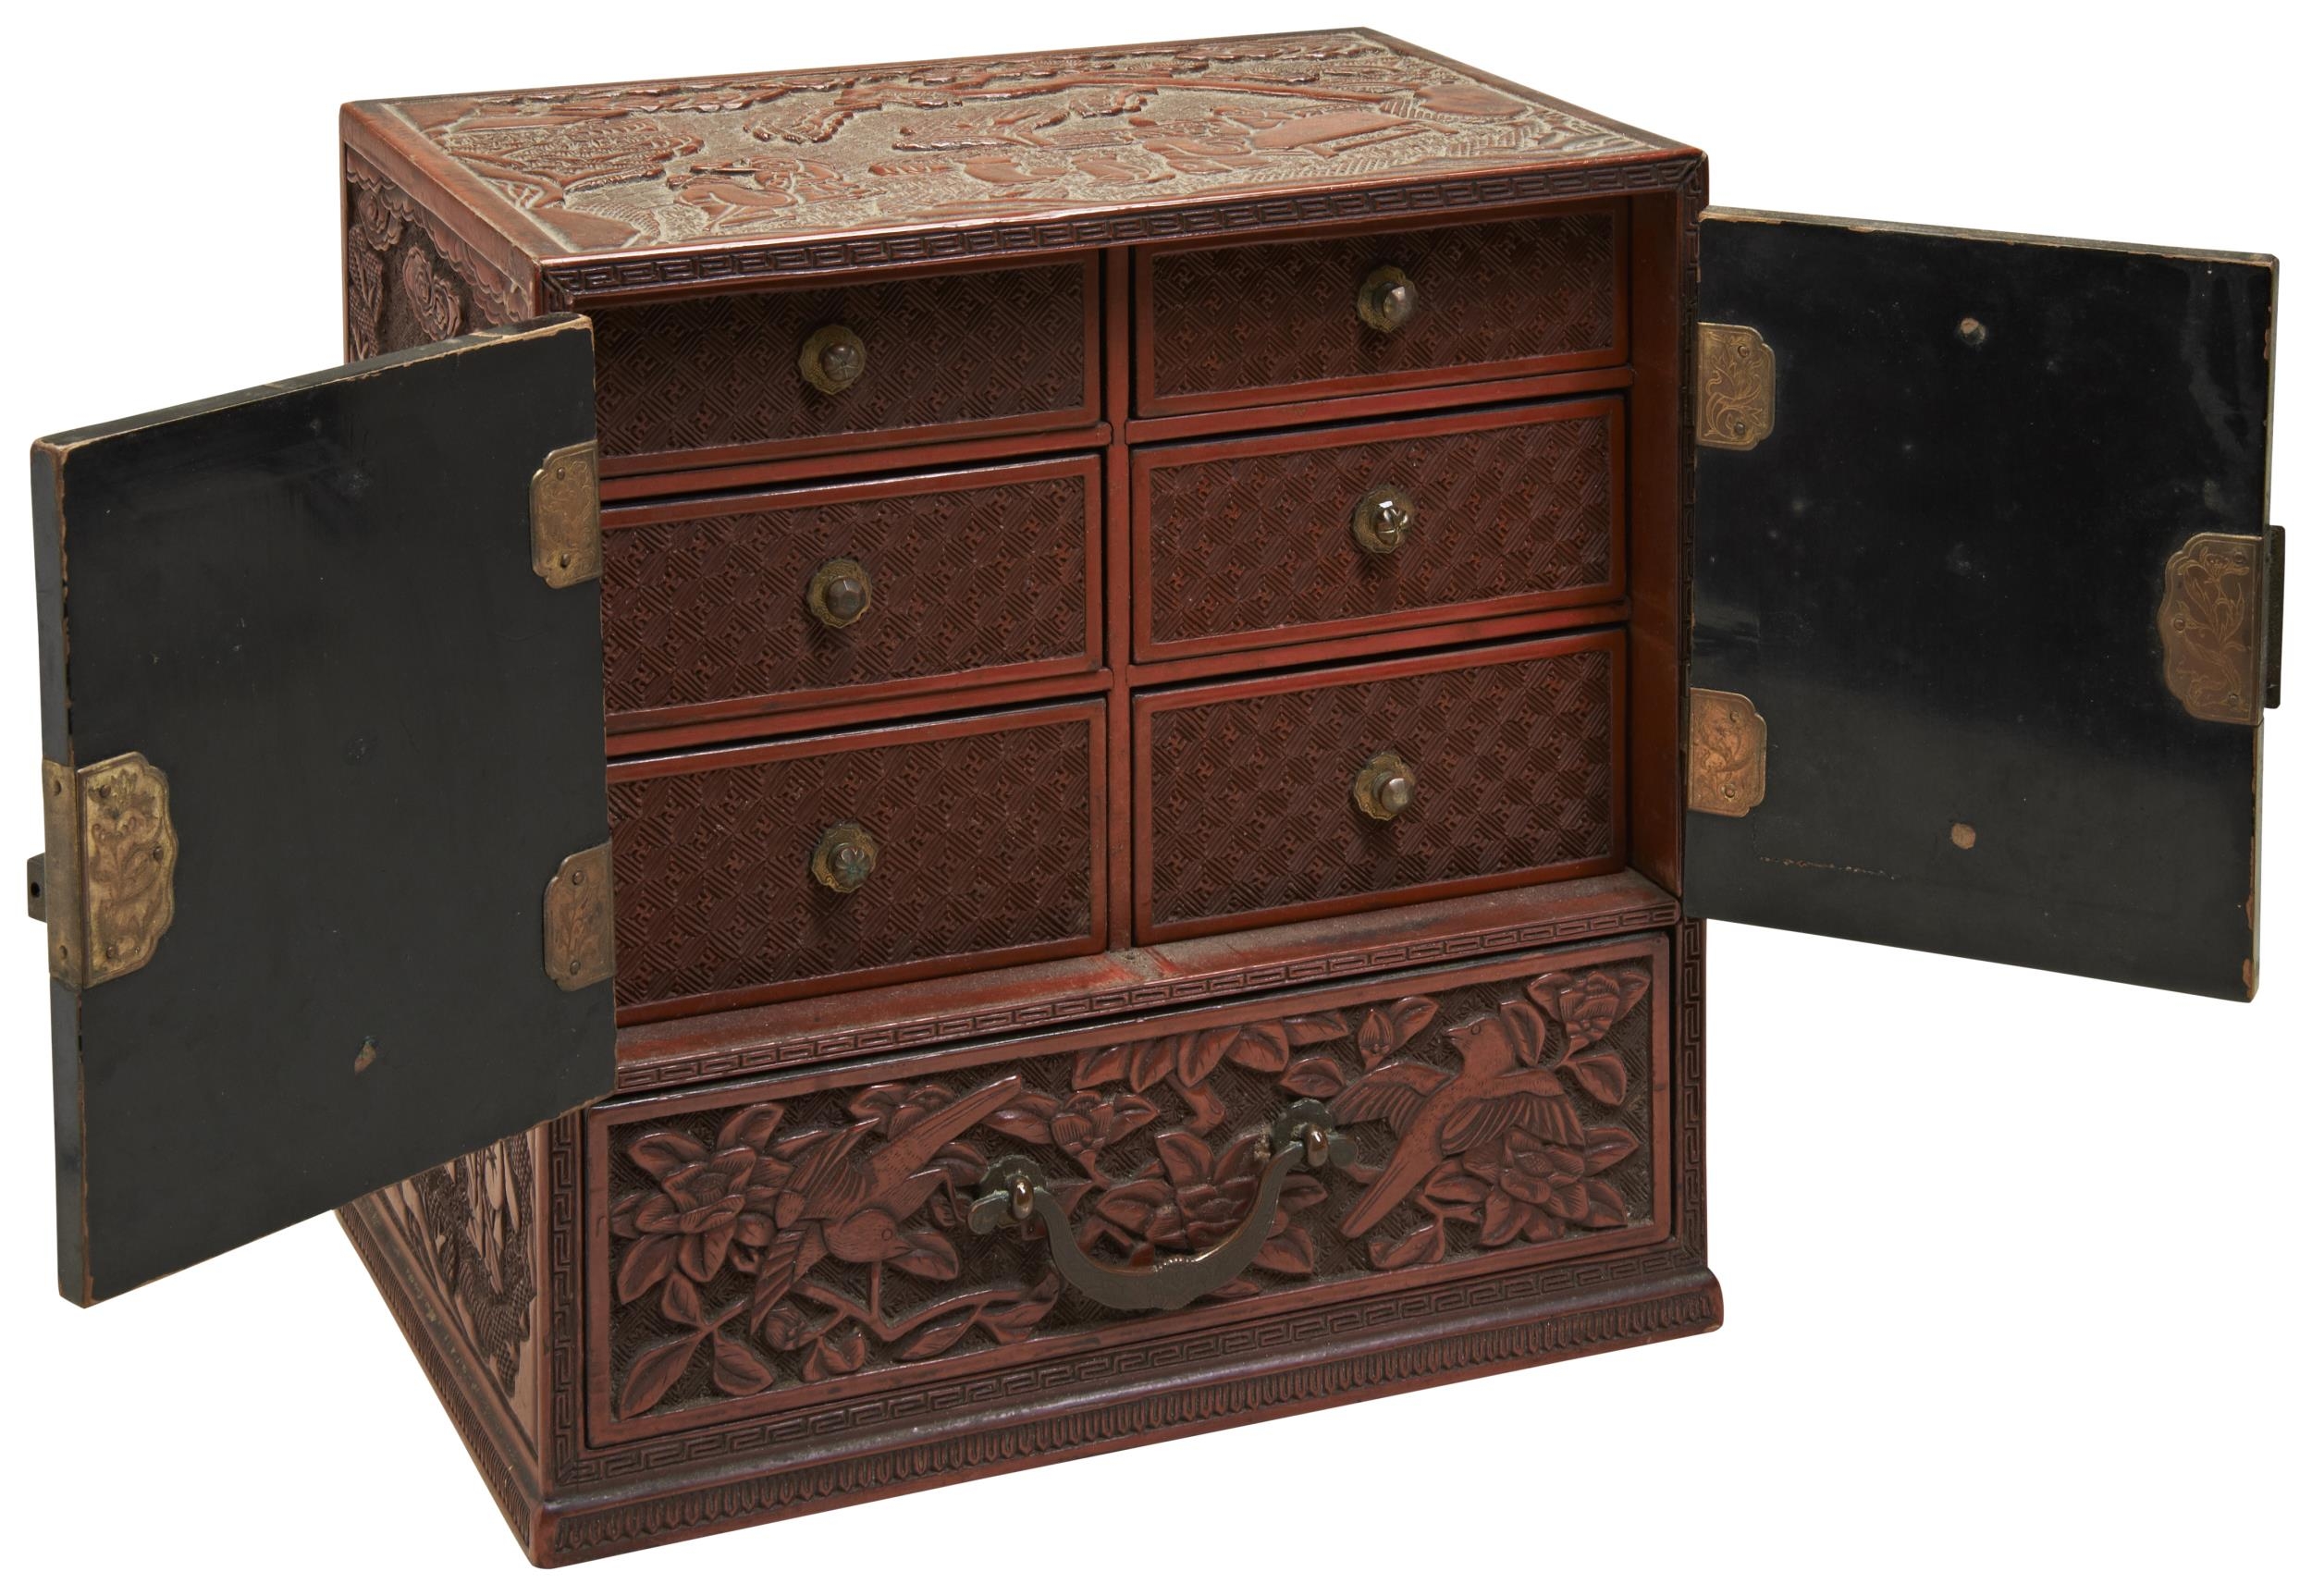 A CINNABAR LACQUER TABLE CABINET QING DYNASTY, 19TH CENTURY the exterior carved with lotus blossoms, - Image 2 of 2